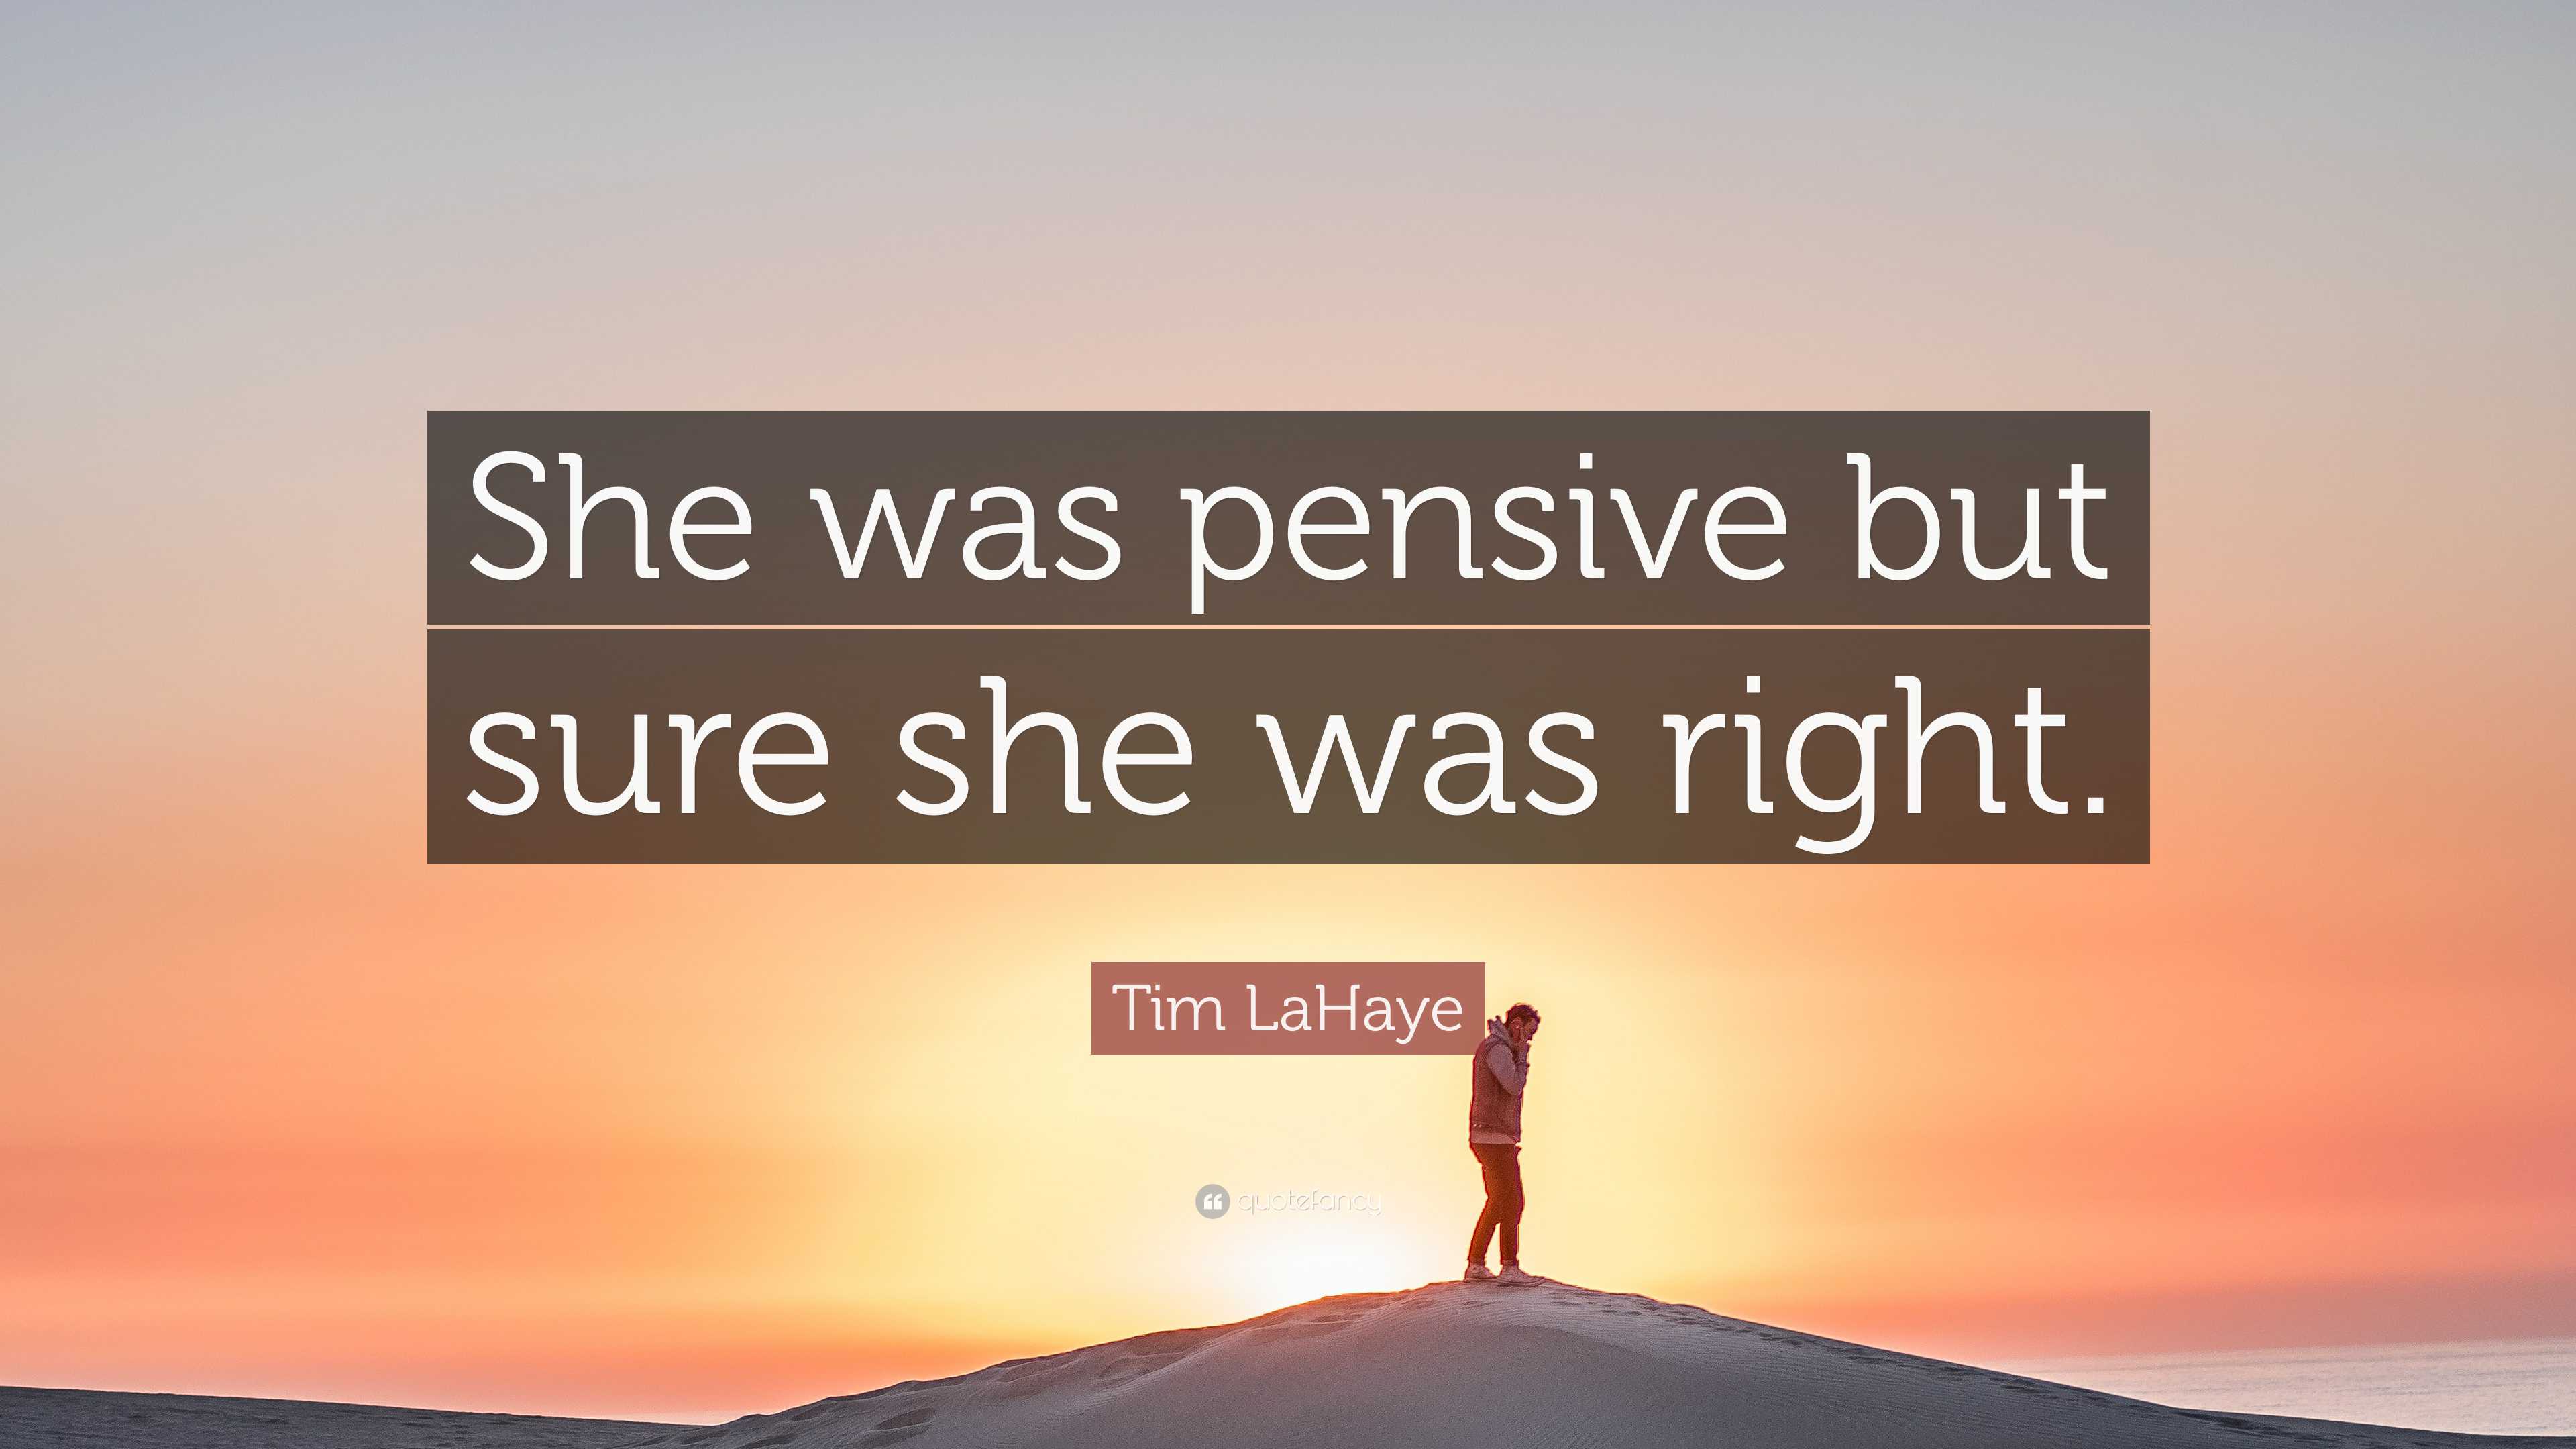 Tim LaHaye Quote: “She was pensive but sure she was right.”